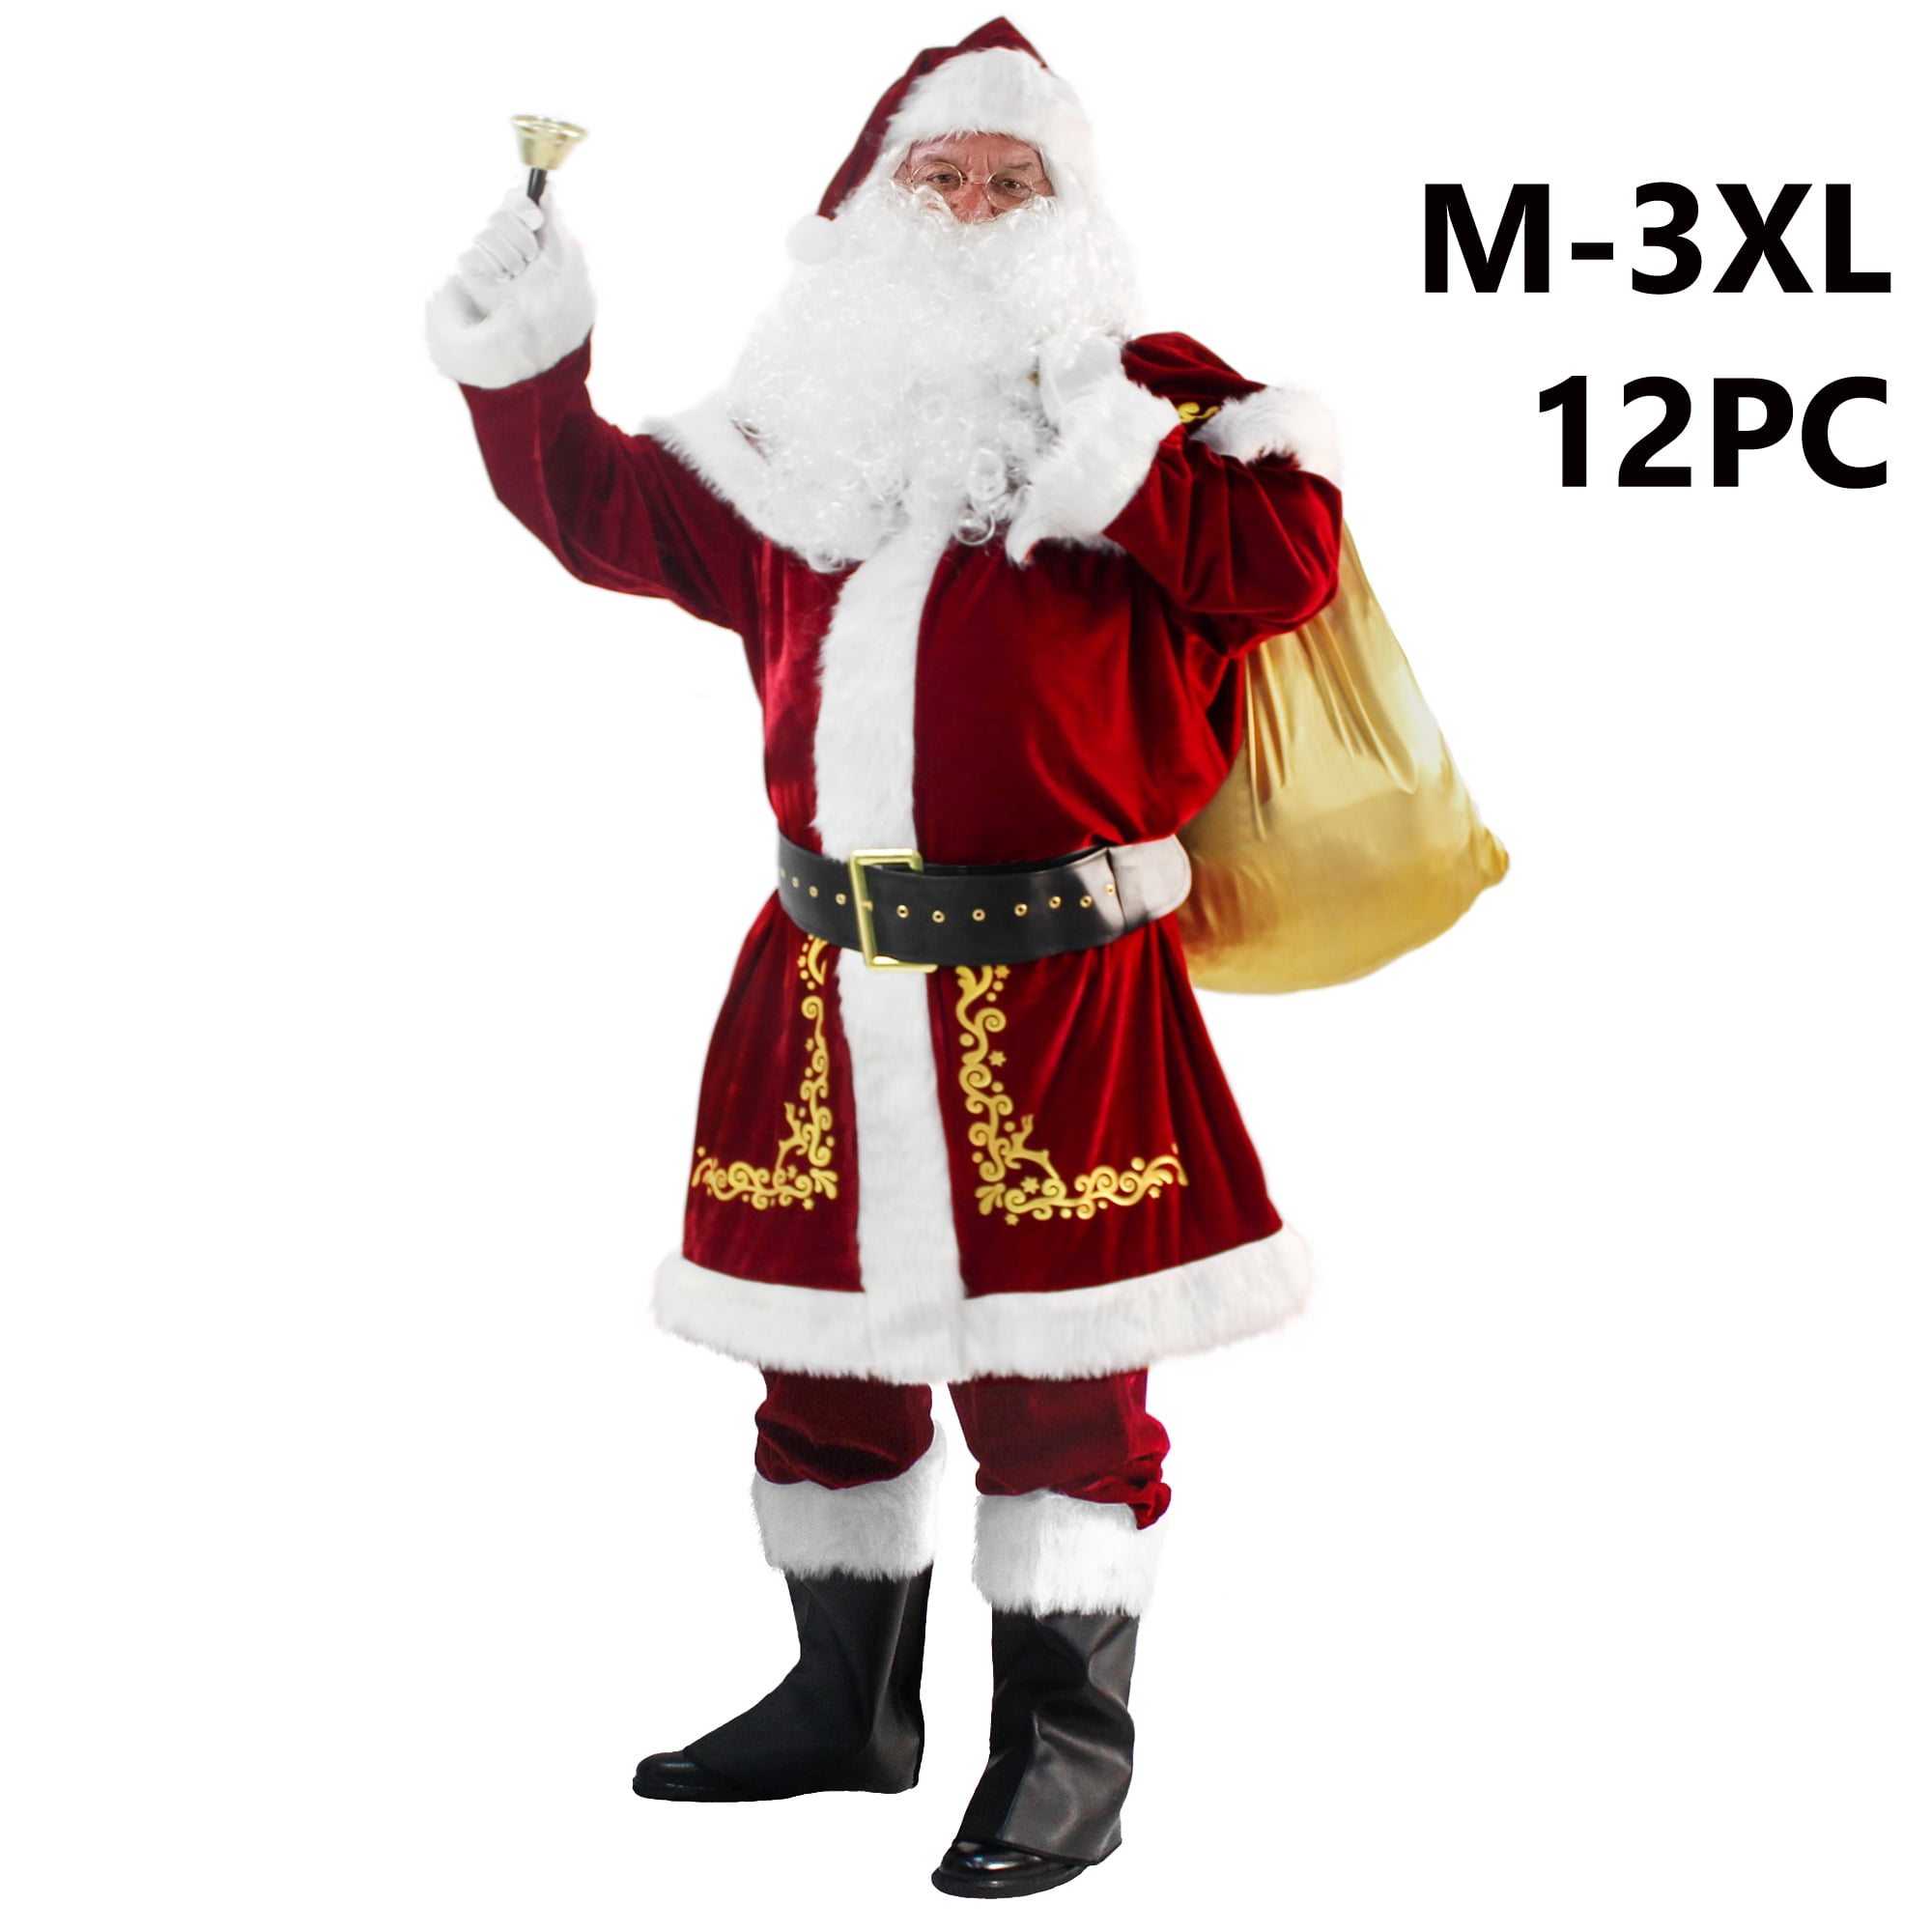 Santa Skin Suit 2nd Skin Xmas Christmas Fancy Dress Costume Outfit Size M-XL 